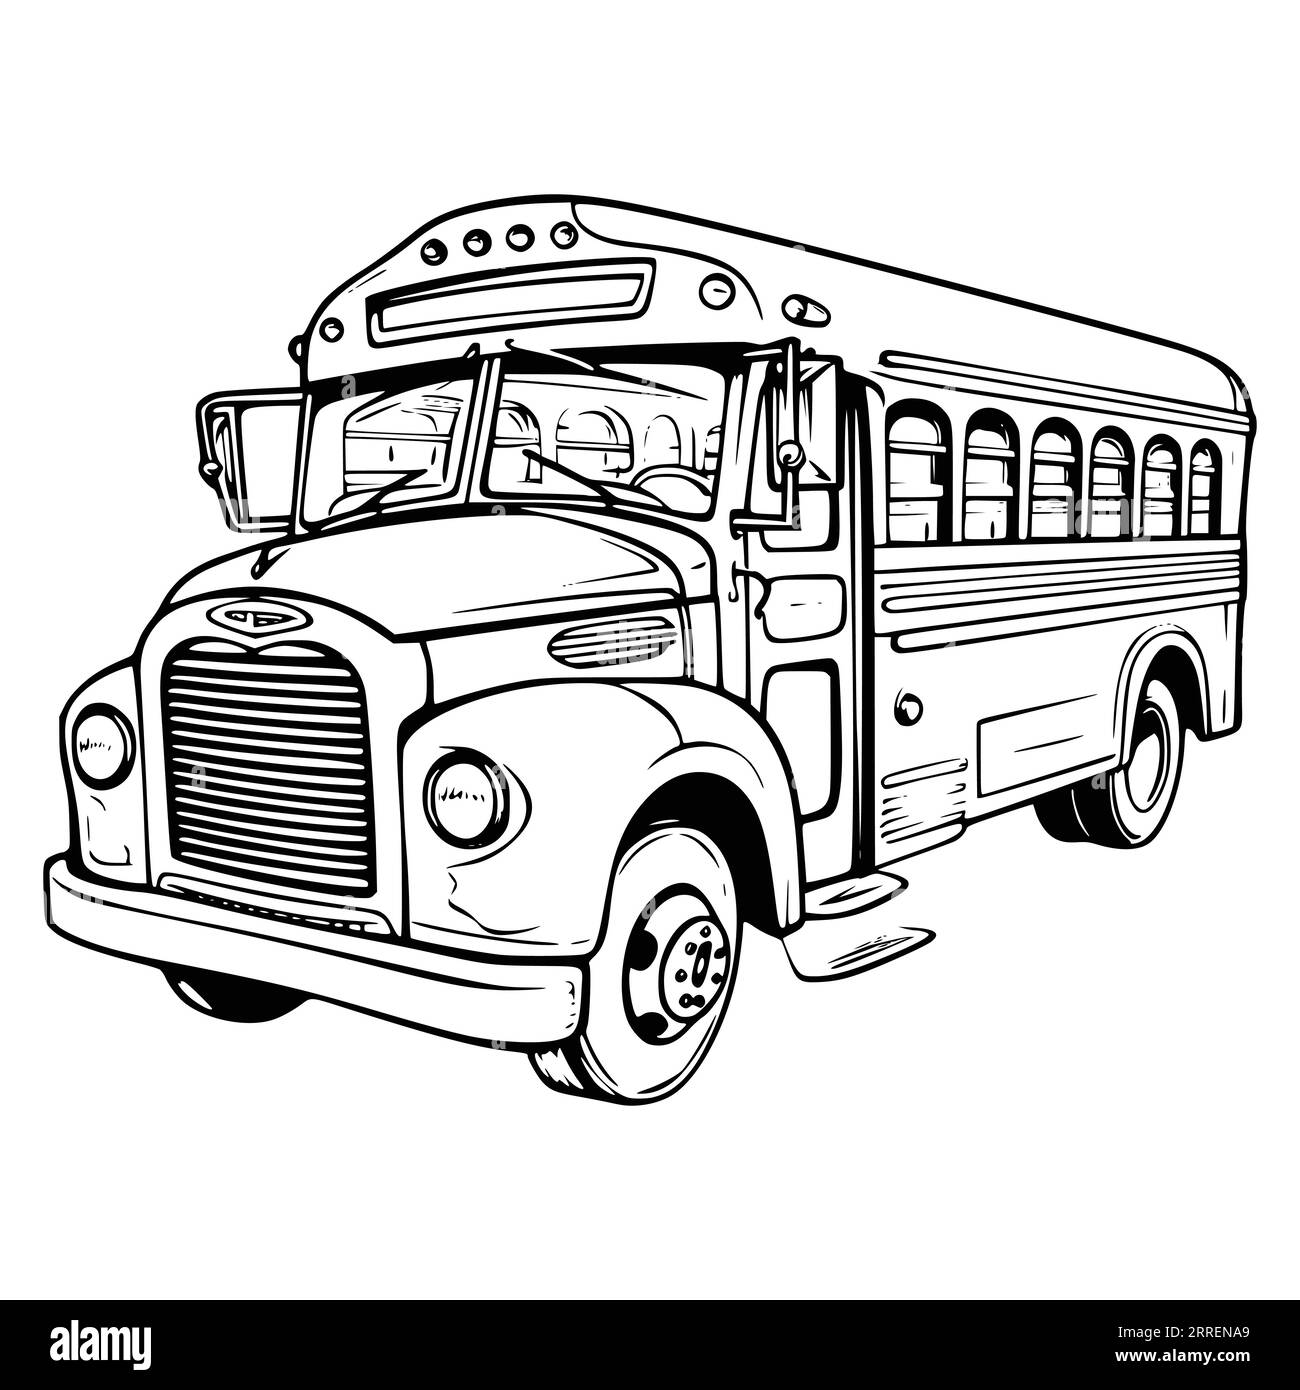 School Bus Coloring Page for Kids Stock Vector